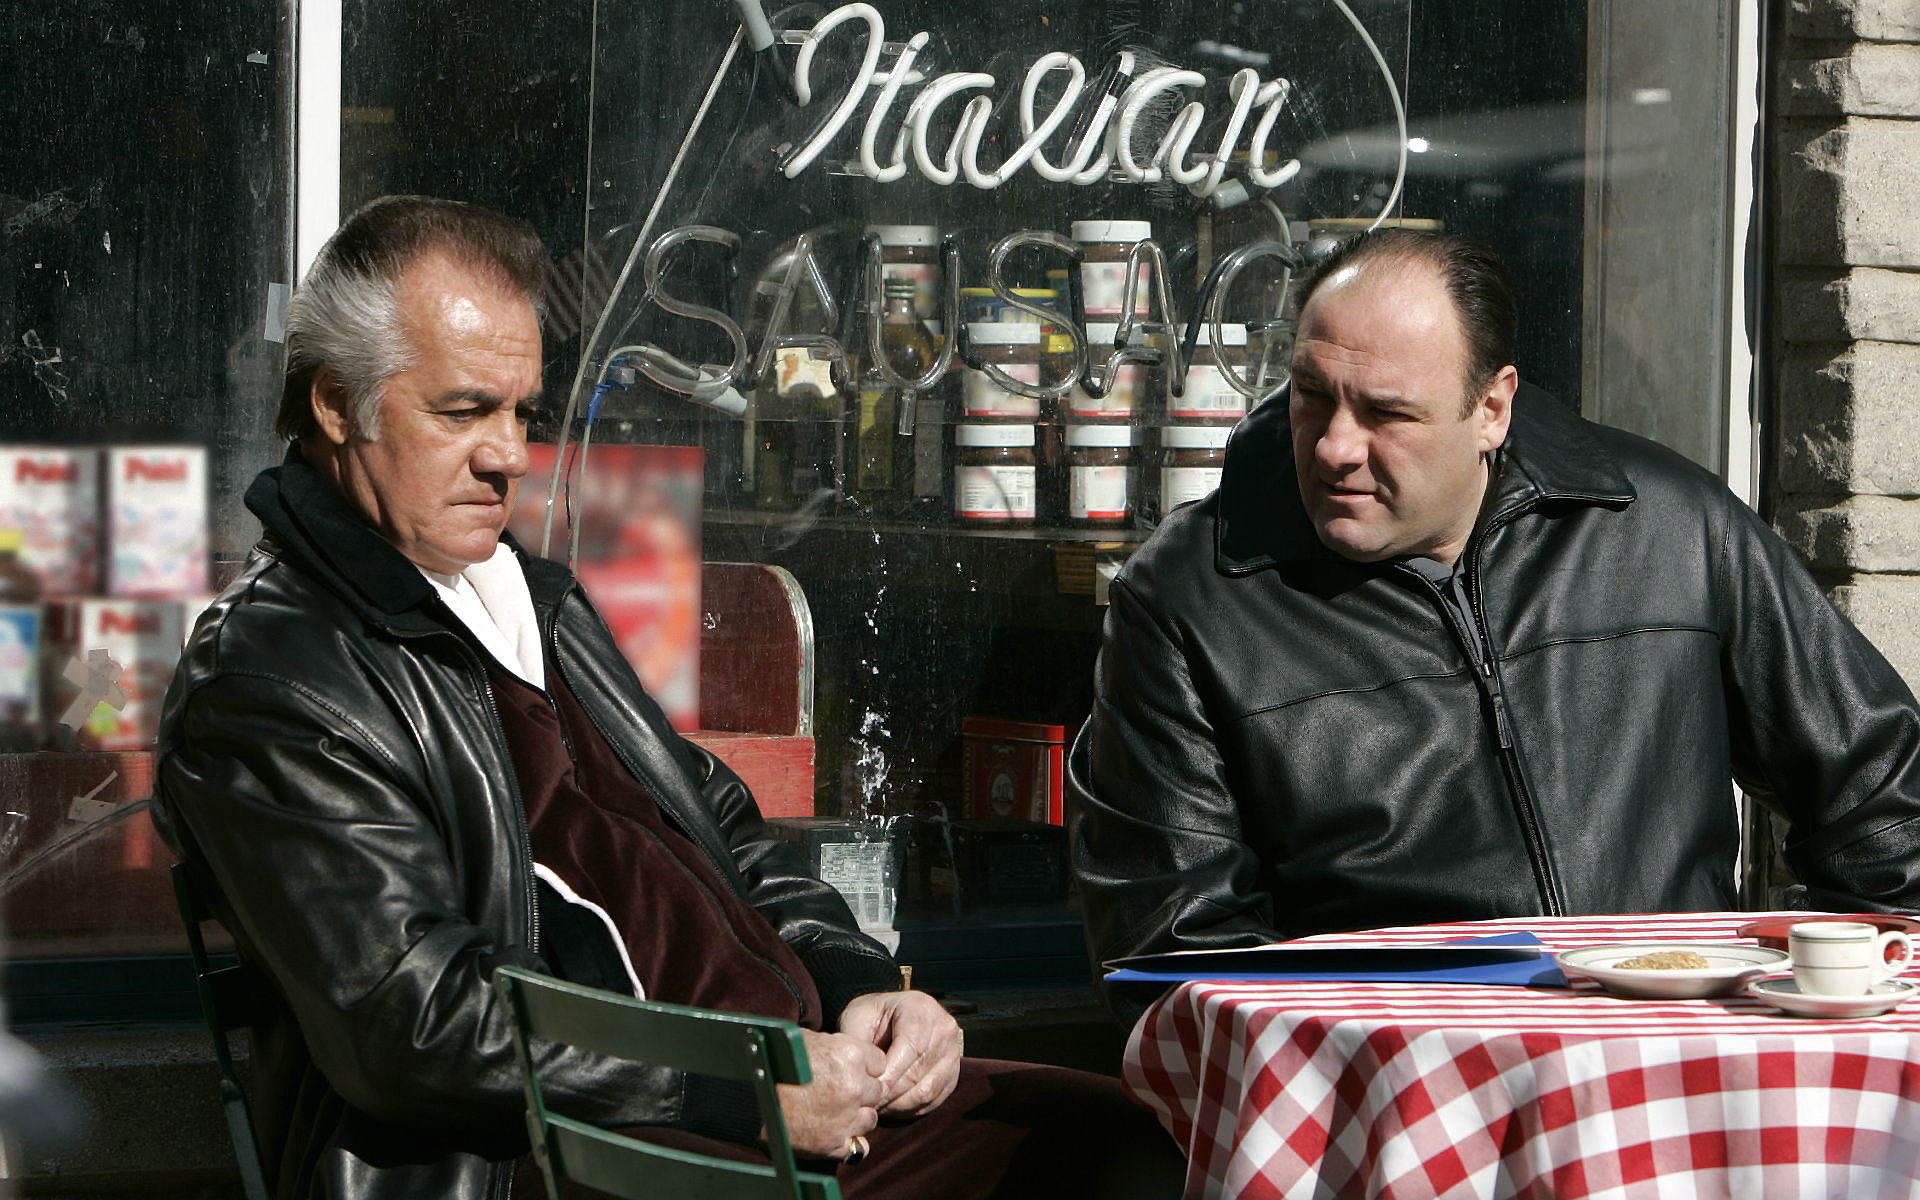 TV Show The Sopranos HD Wallpaper | Background Image